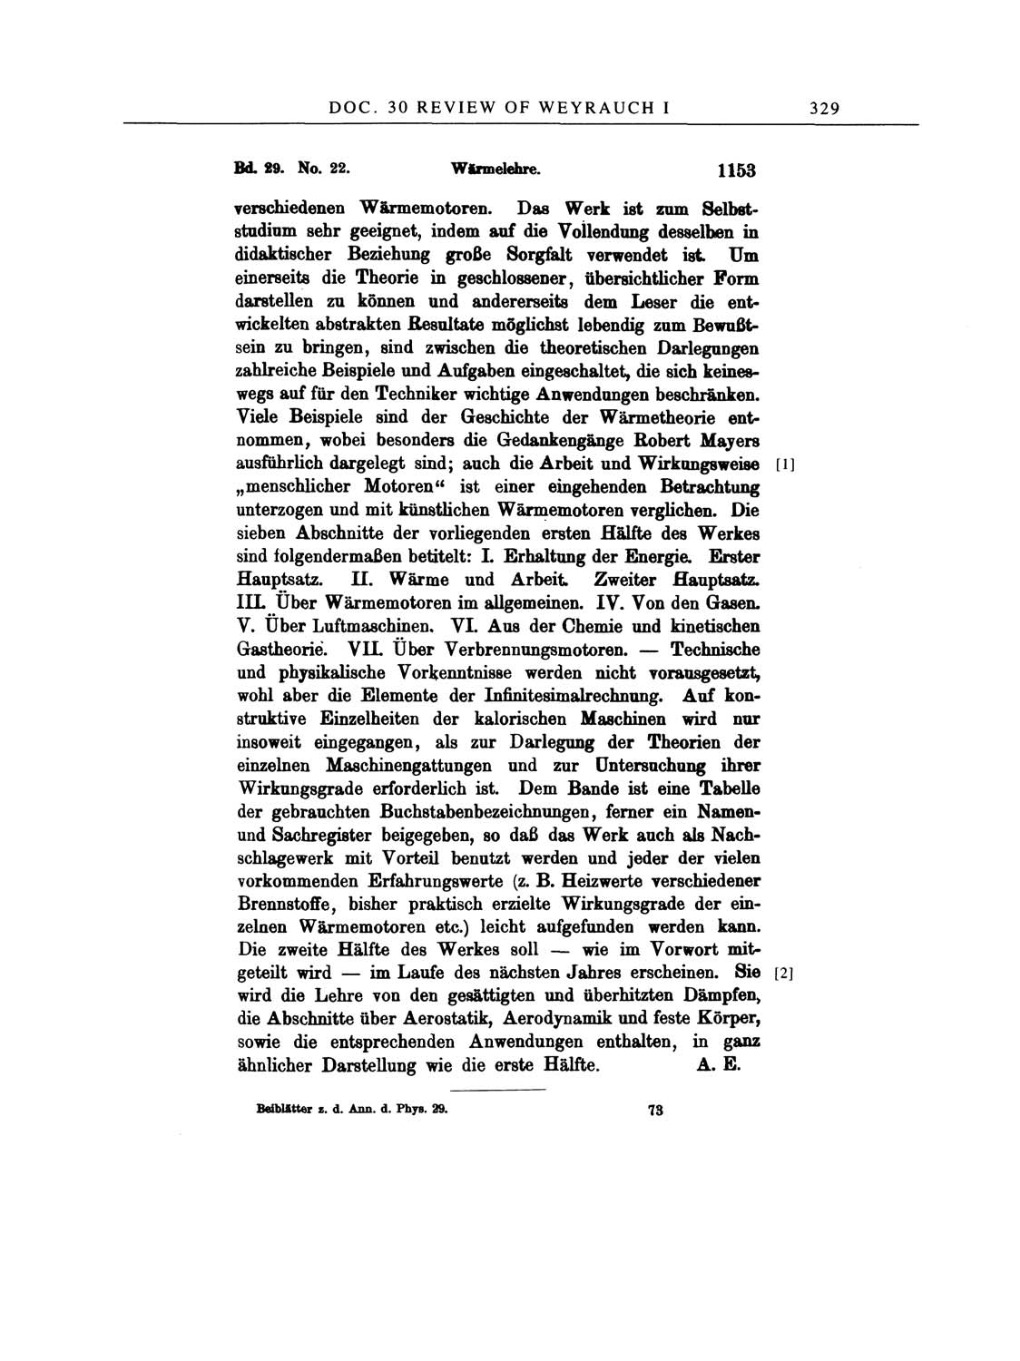 Volume 2: The Swiss Years: Writings, 1900-1909 page 329